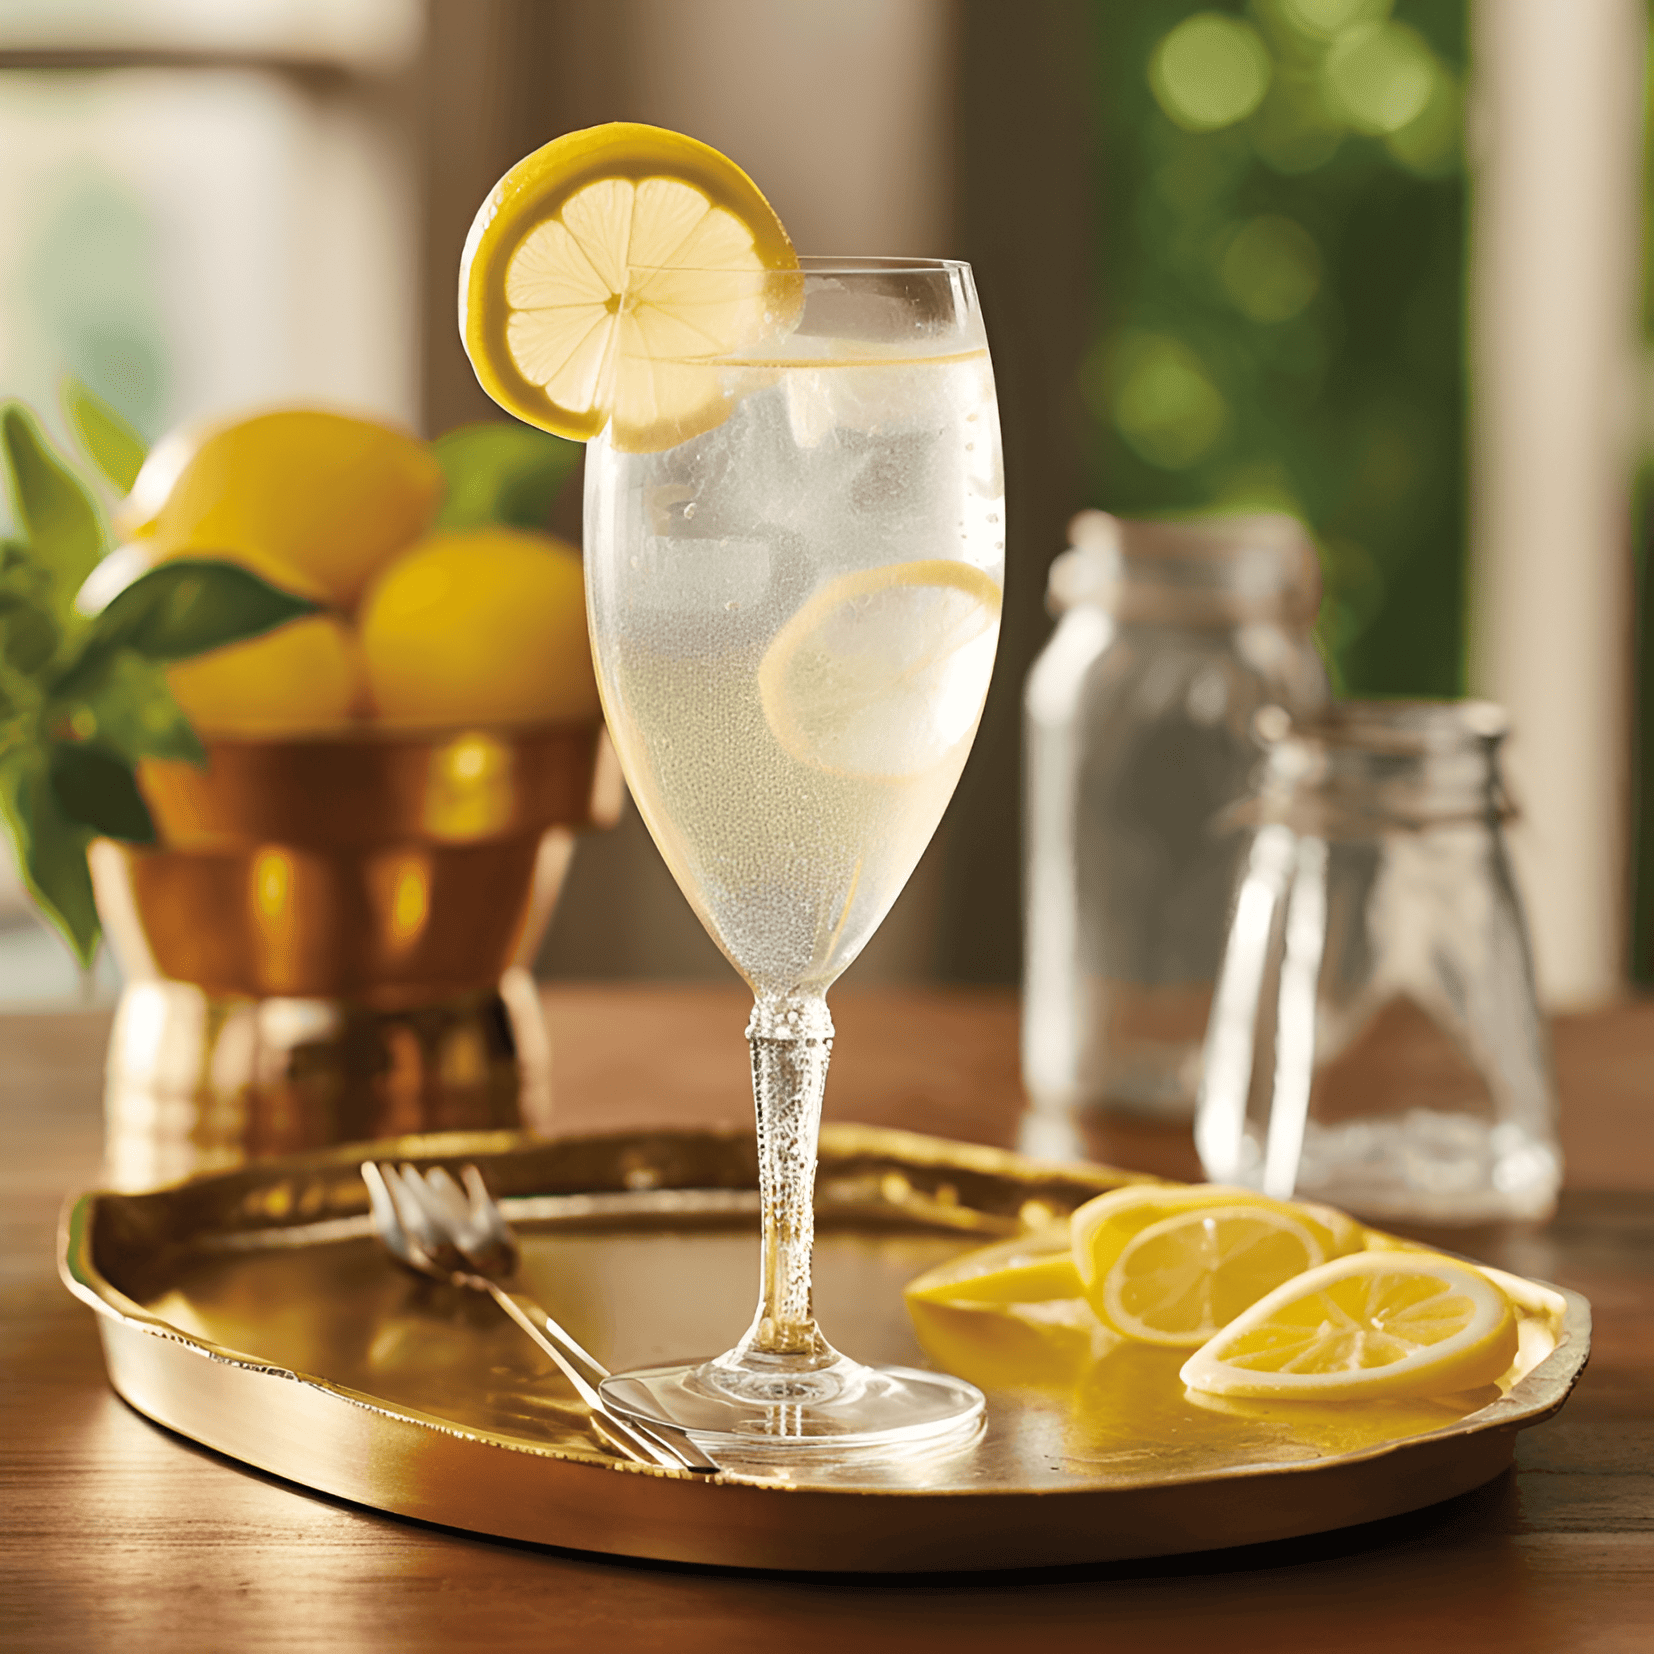 Lemon Squash Cocktail Recipe - Lemon Squash cocktail is a delightful combination of sour, sweet, and slightly bitter flavors. The lemon juice provides a tangy and zesty taste, while the sugar syrup balances it with a touch of sweetness. The soda water adds a refreshing fizz and lightness to the drink.